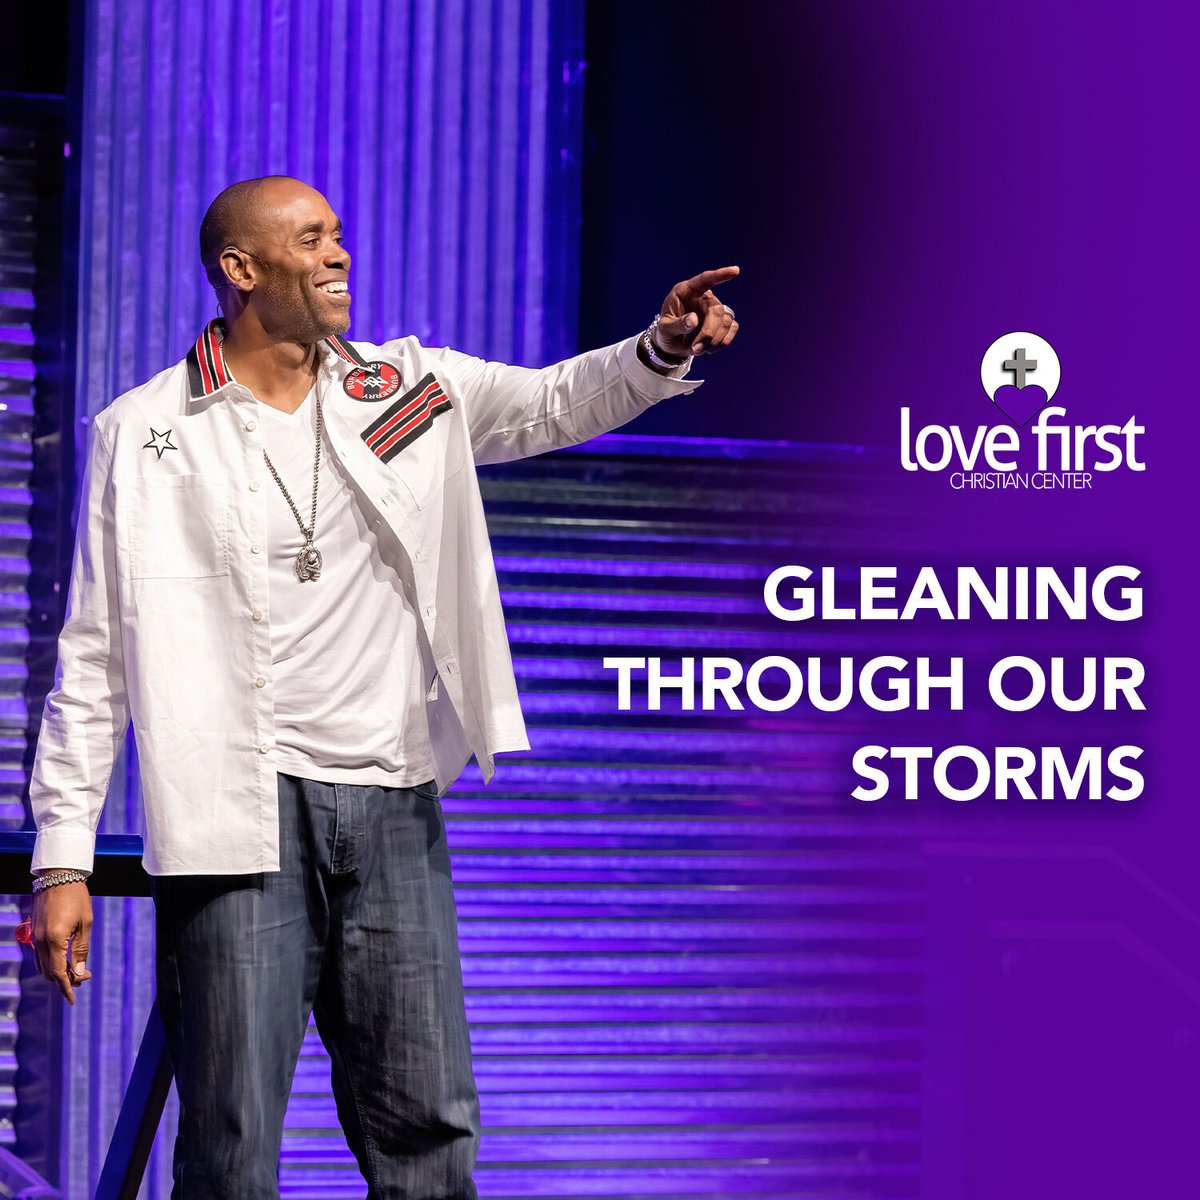 'Through storms, we glean and grow.' - Pastor Jomo

Embrace challenges, shine and grow as Christ's followers. With God's strength, weather storms, let your light shine. Trust in Jesus, stay grateful.

#GleaningThroughStorms #LoveFirstChristianCenter #GodsStrength